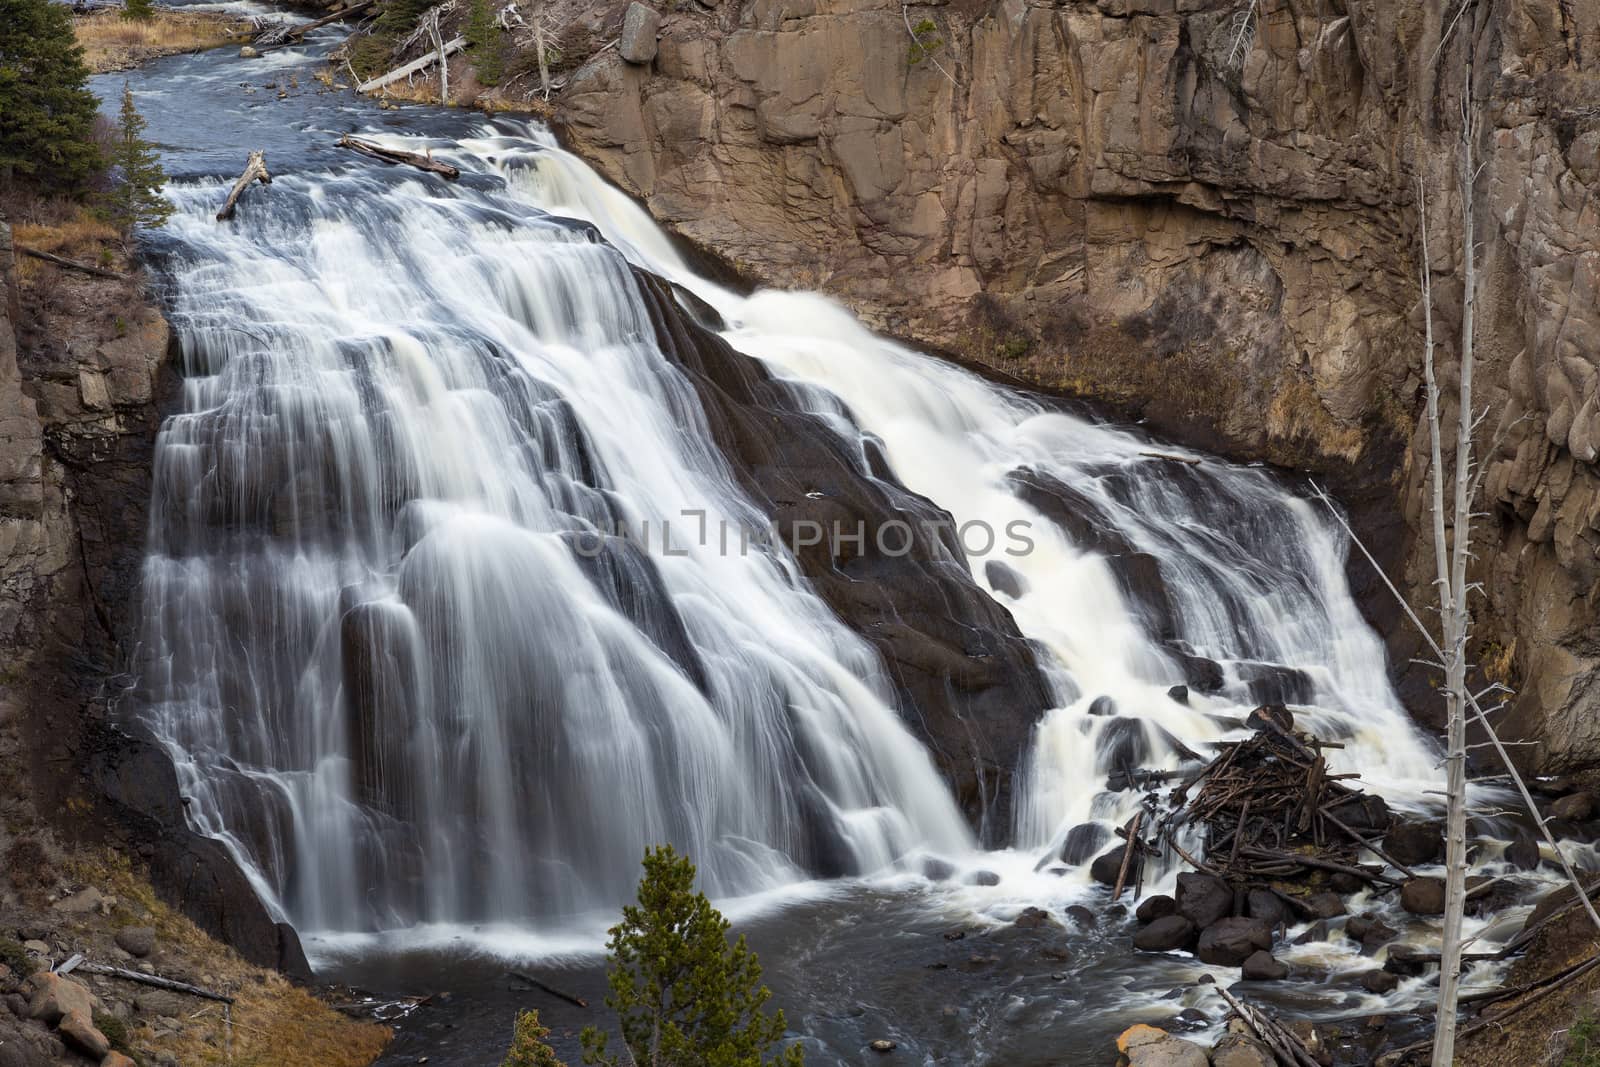 A closeup view of Gibbon Falls in Yellowstone National Park.